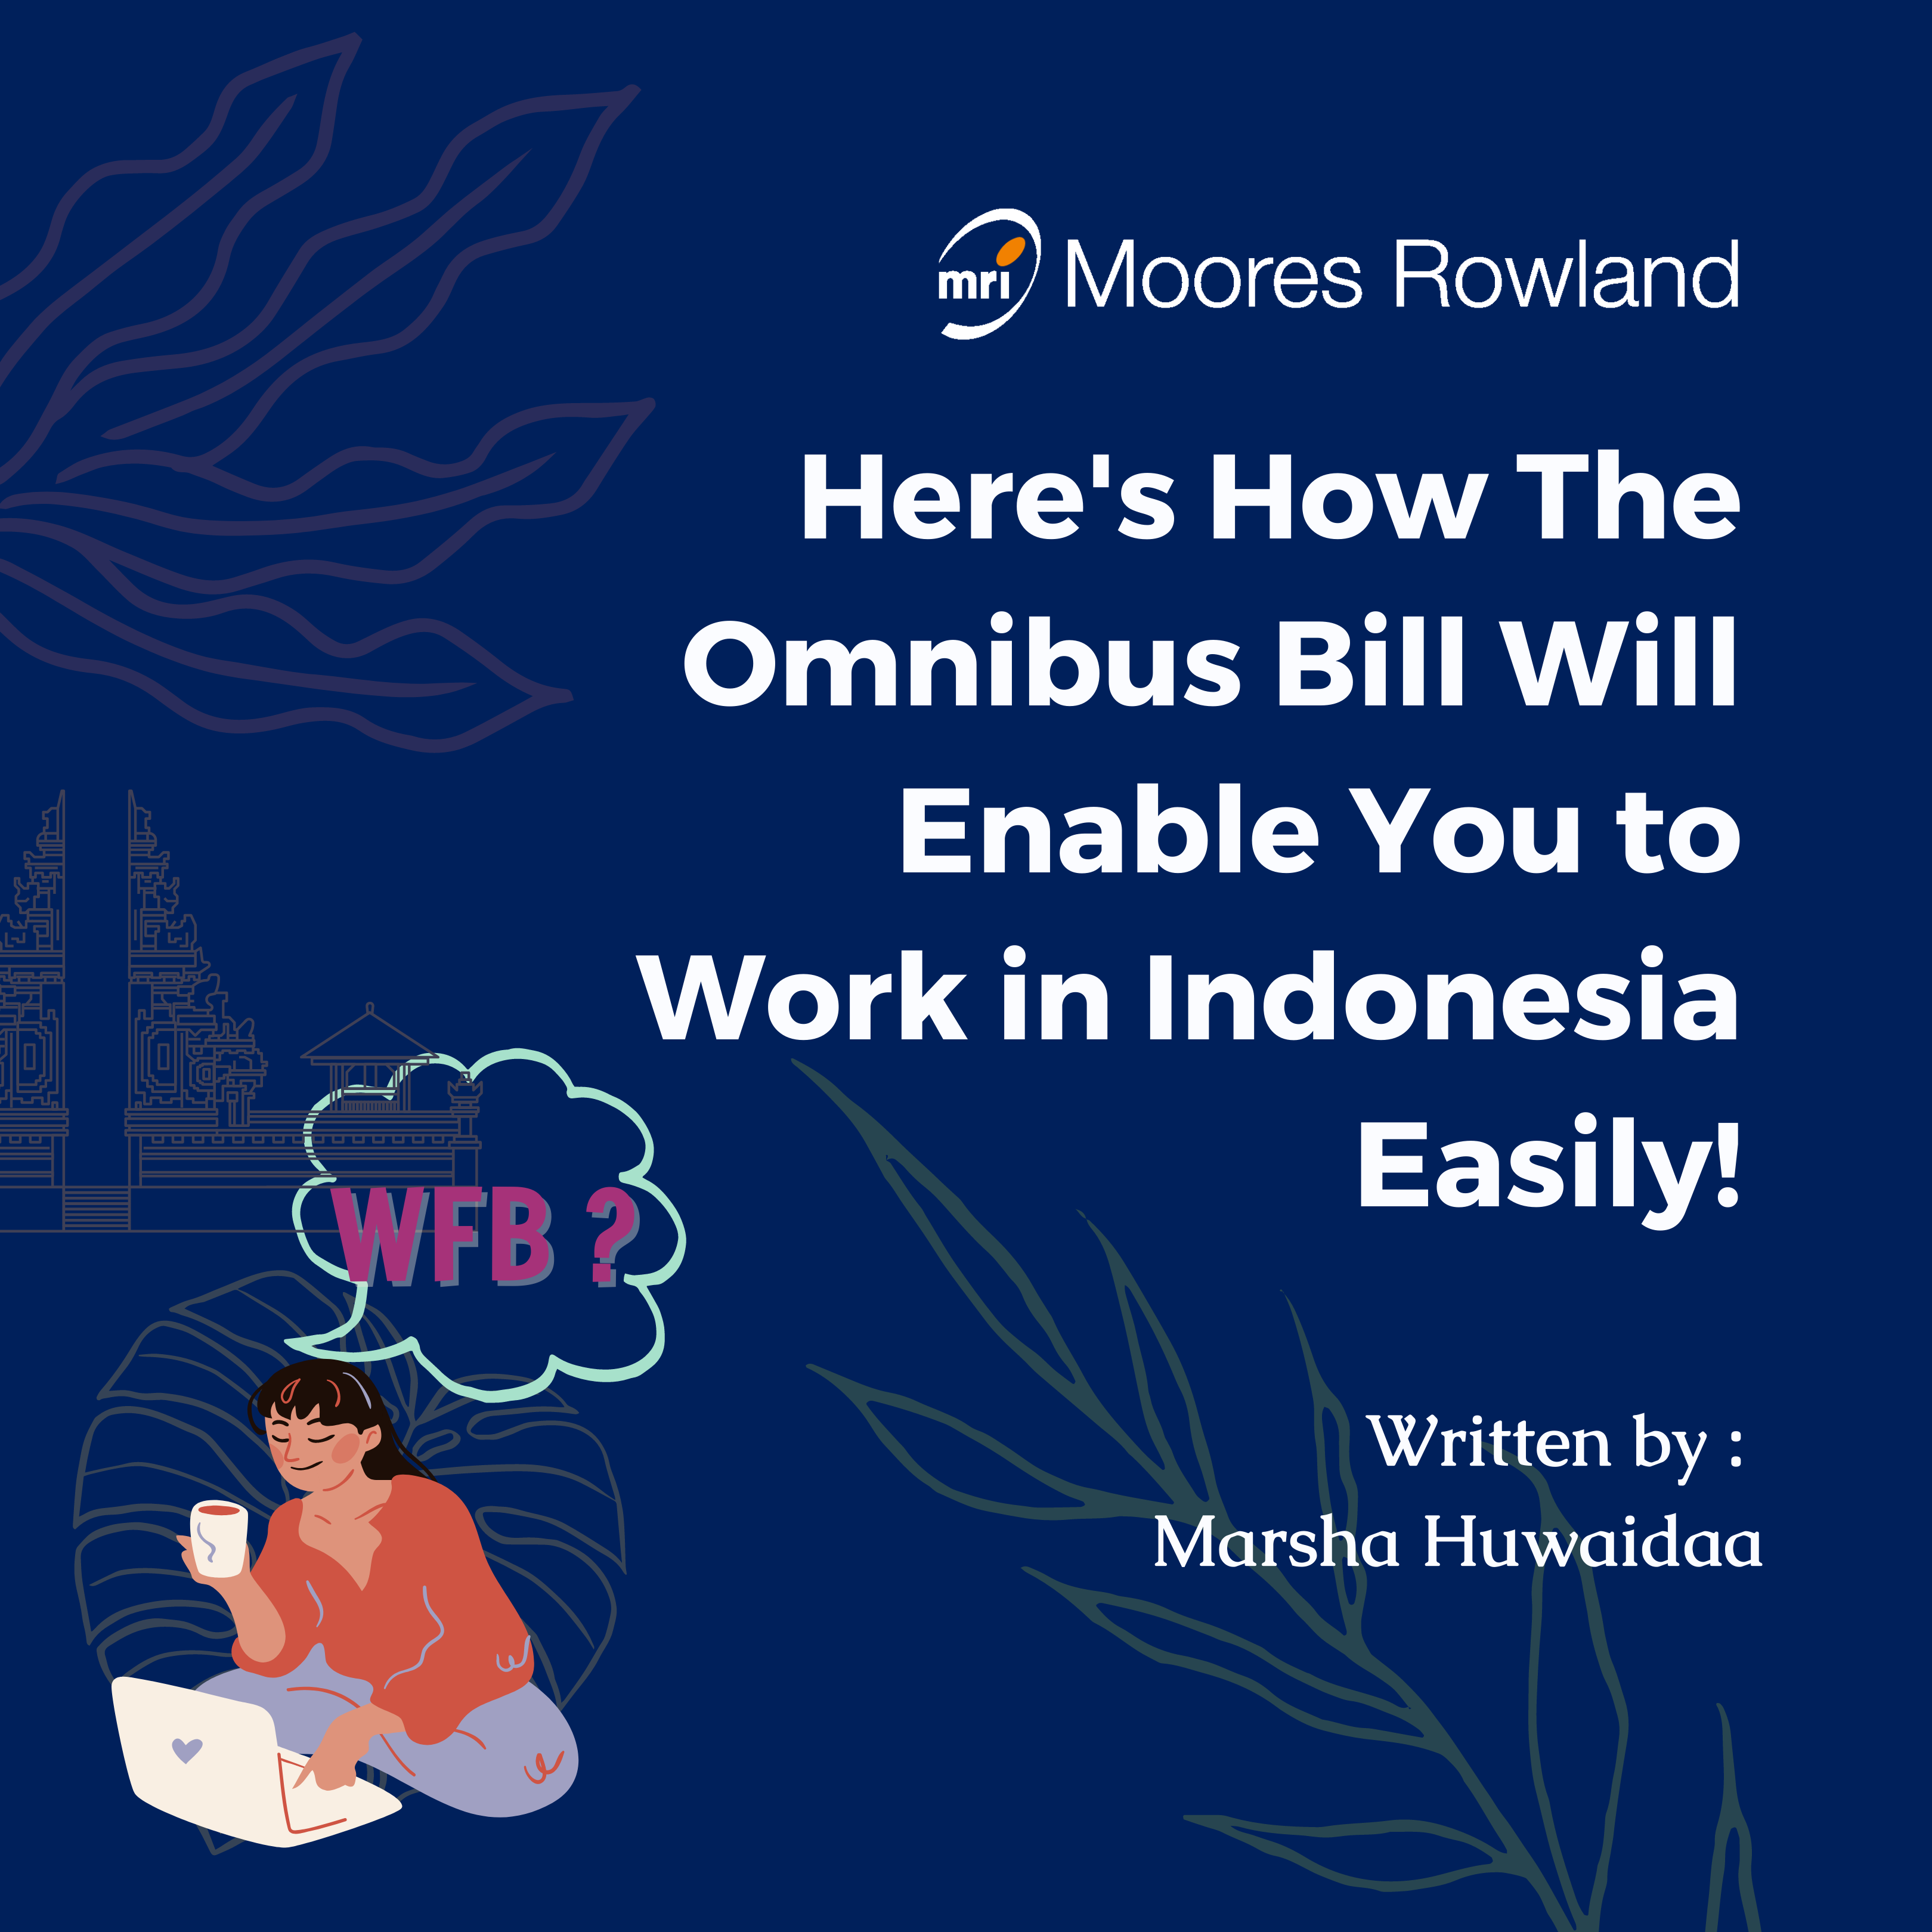 Here's How The Omnibus Bill Will Enable You to Work in Indonesia Easily!